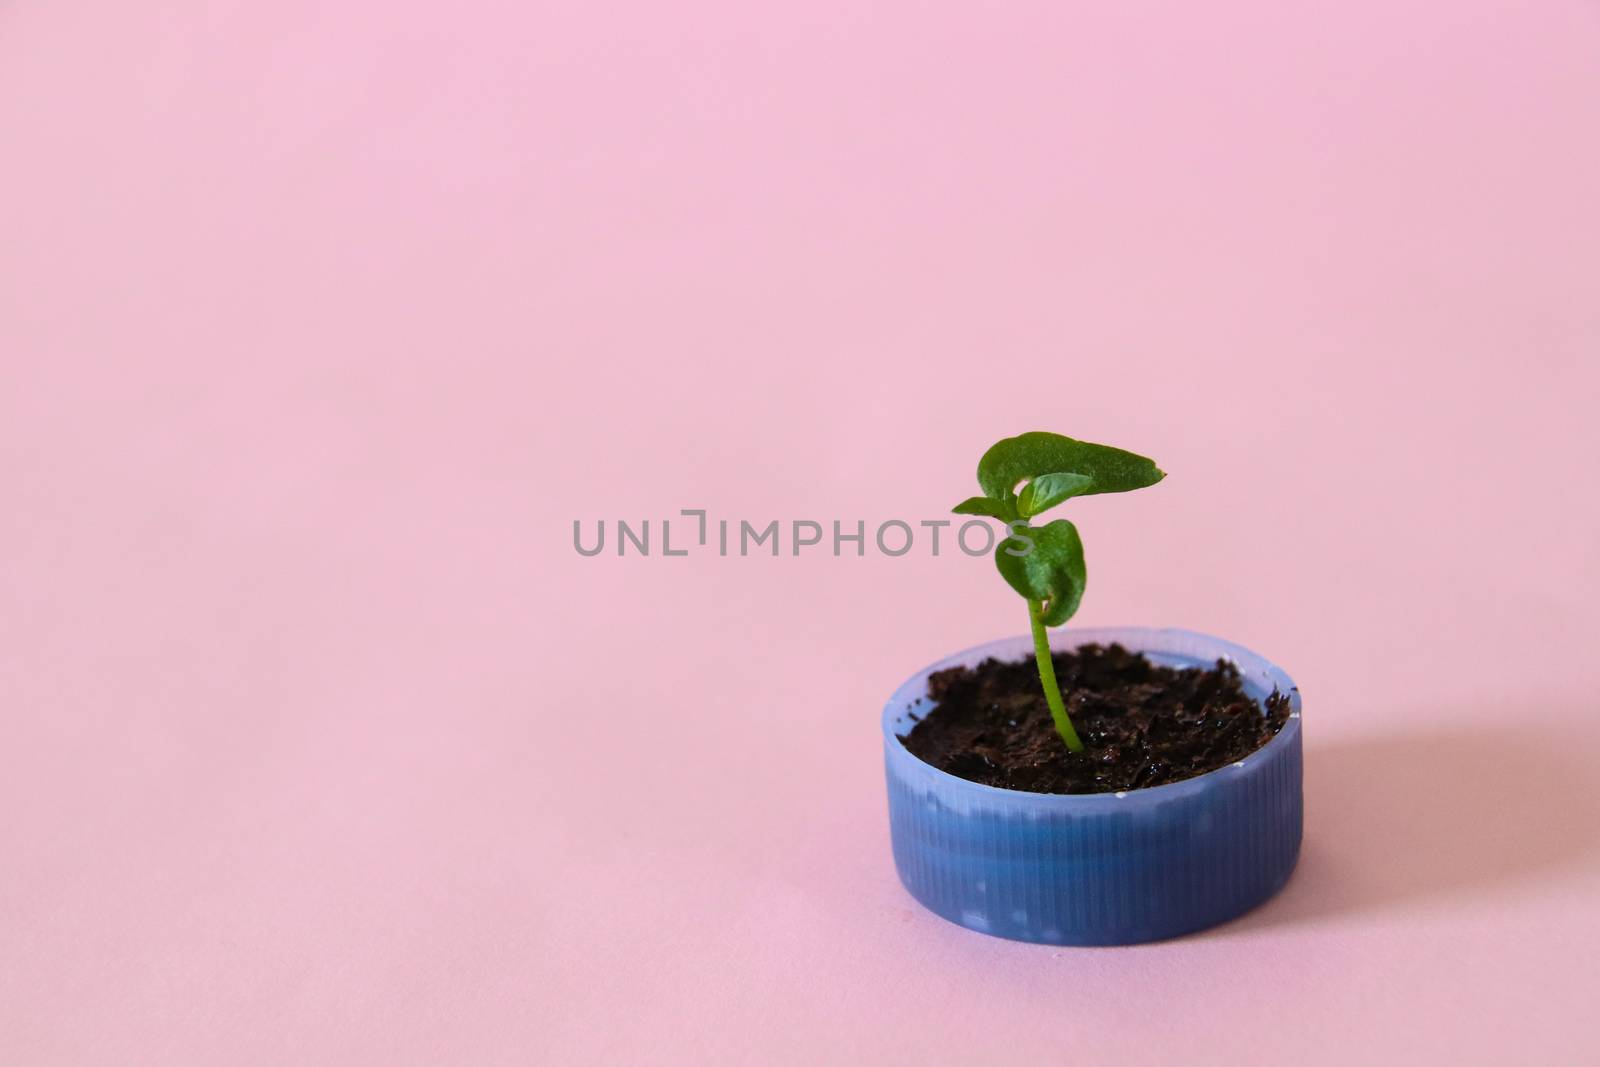 Conceptual still life showing hope for nature and the planet